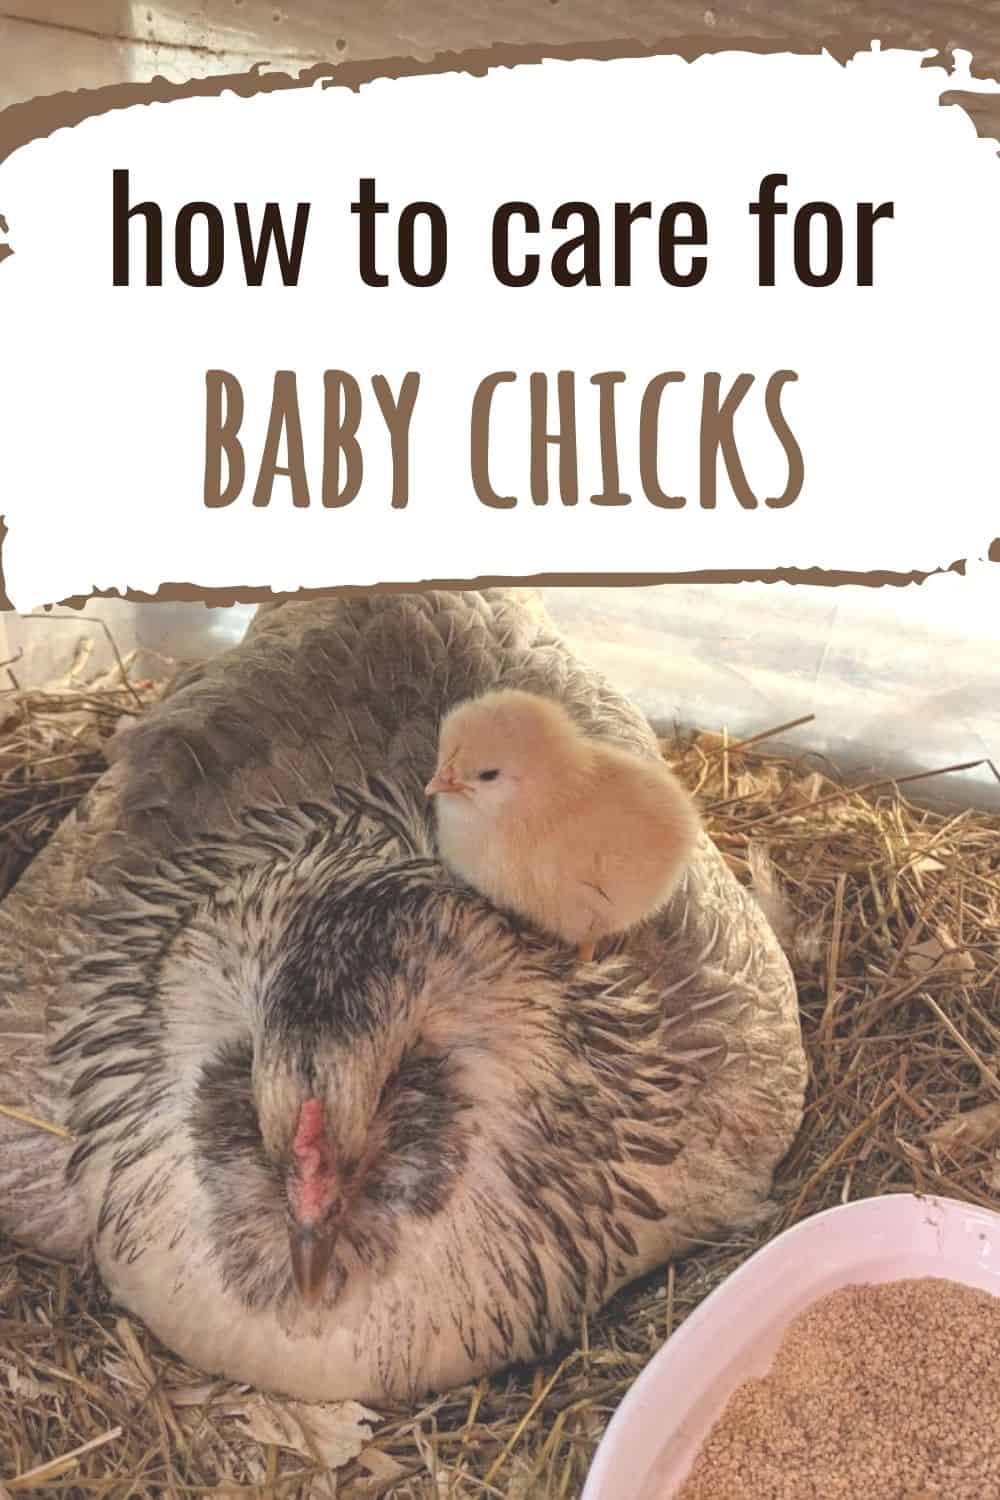 How to care for baby chicks